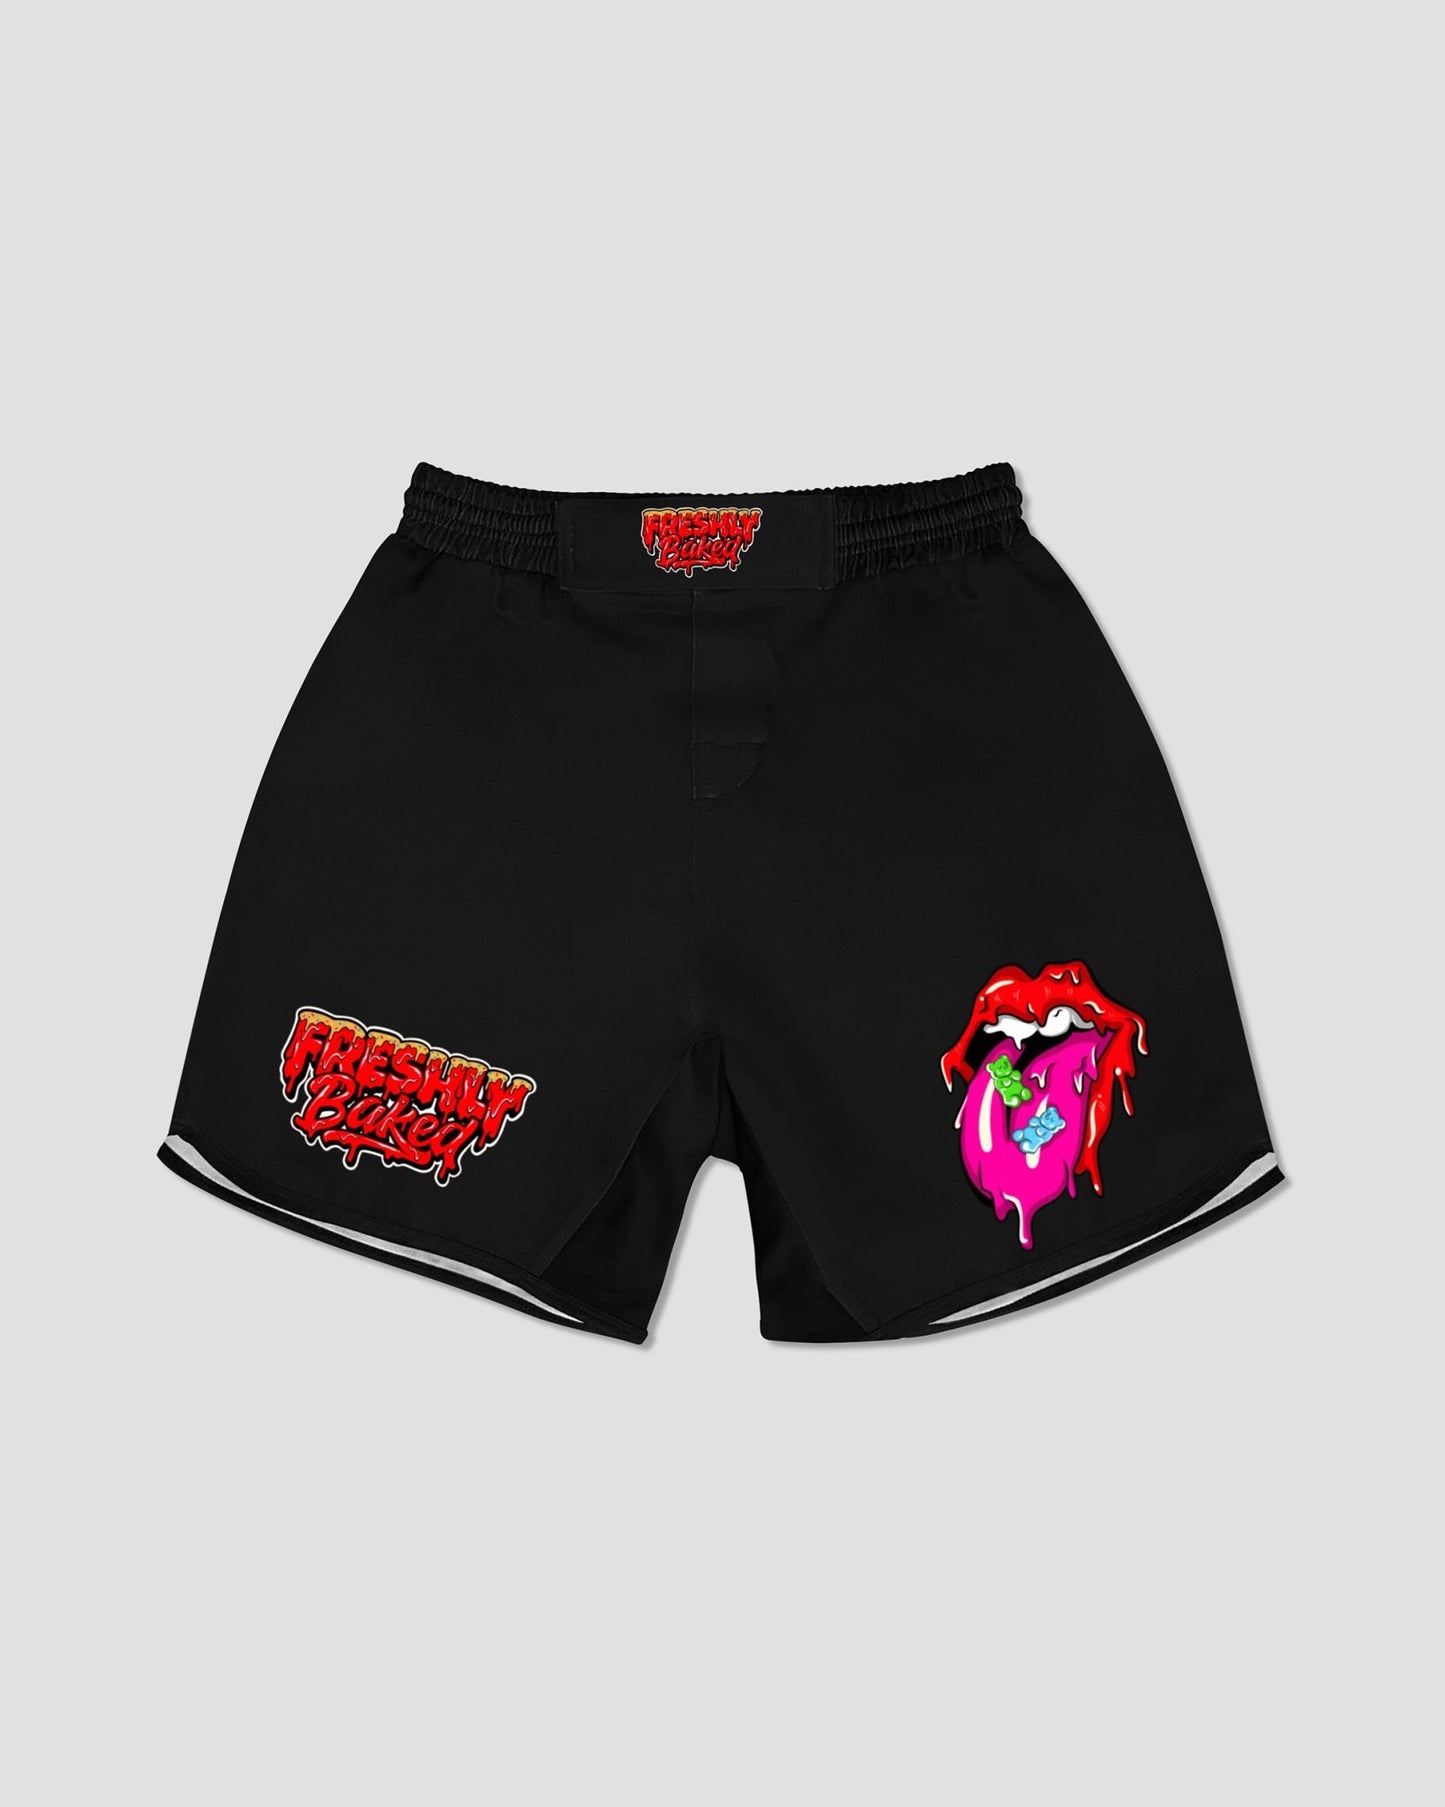 Rolling Stoned Grappling Shorts - Freshly Baked FightwearShorts